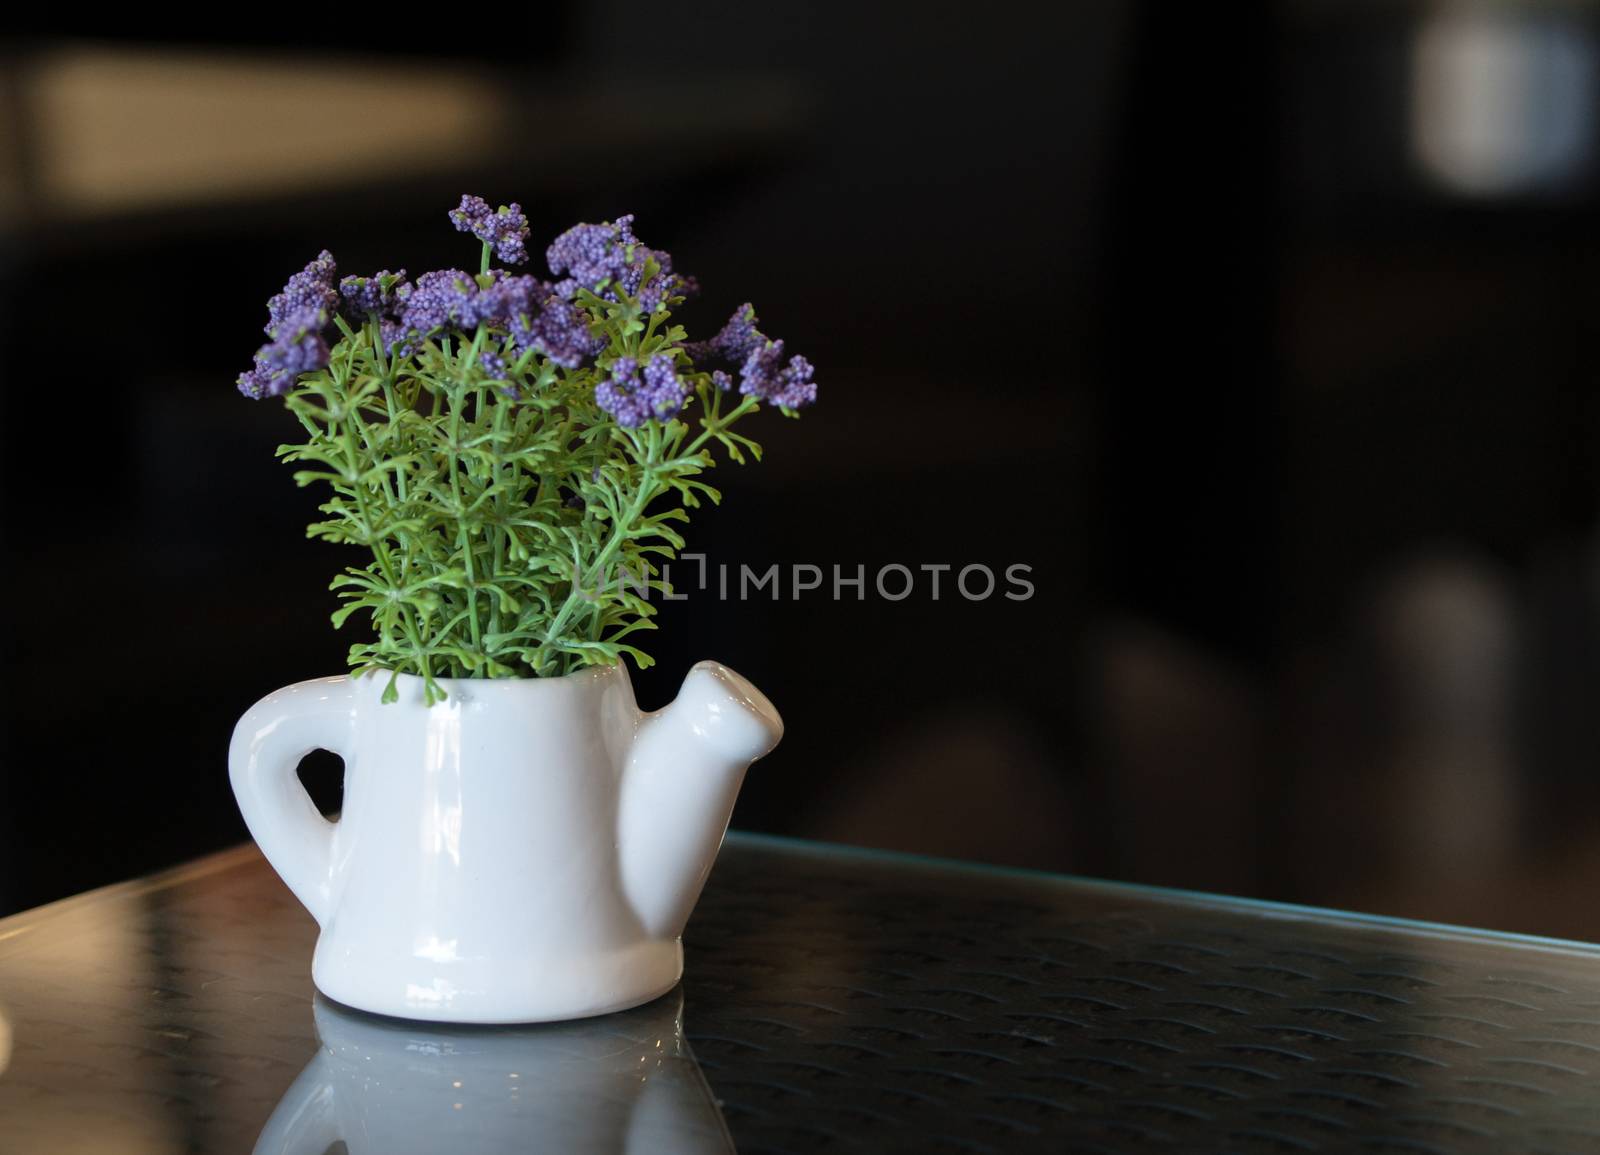 COLOR PHOTO OF SMALL PLANT POTTED IN WATERING POT ON TABLETOP